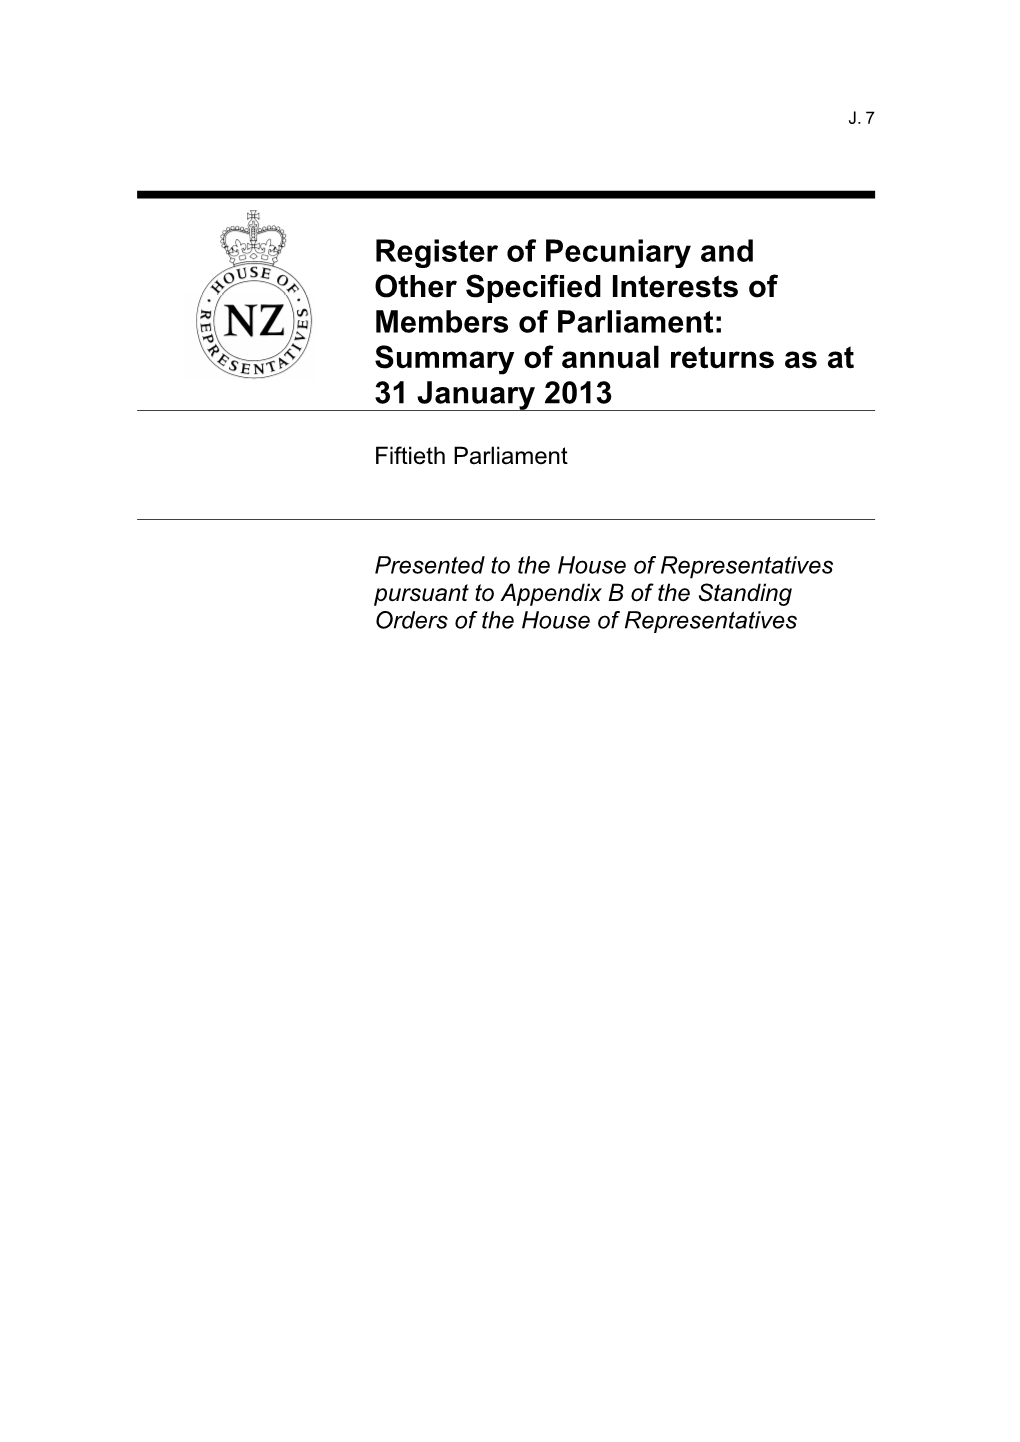 Register of Pecuniary and Other Specified Interests of Members of Parliament: Summary of Annual Returns As at 31 January 2013